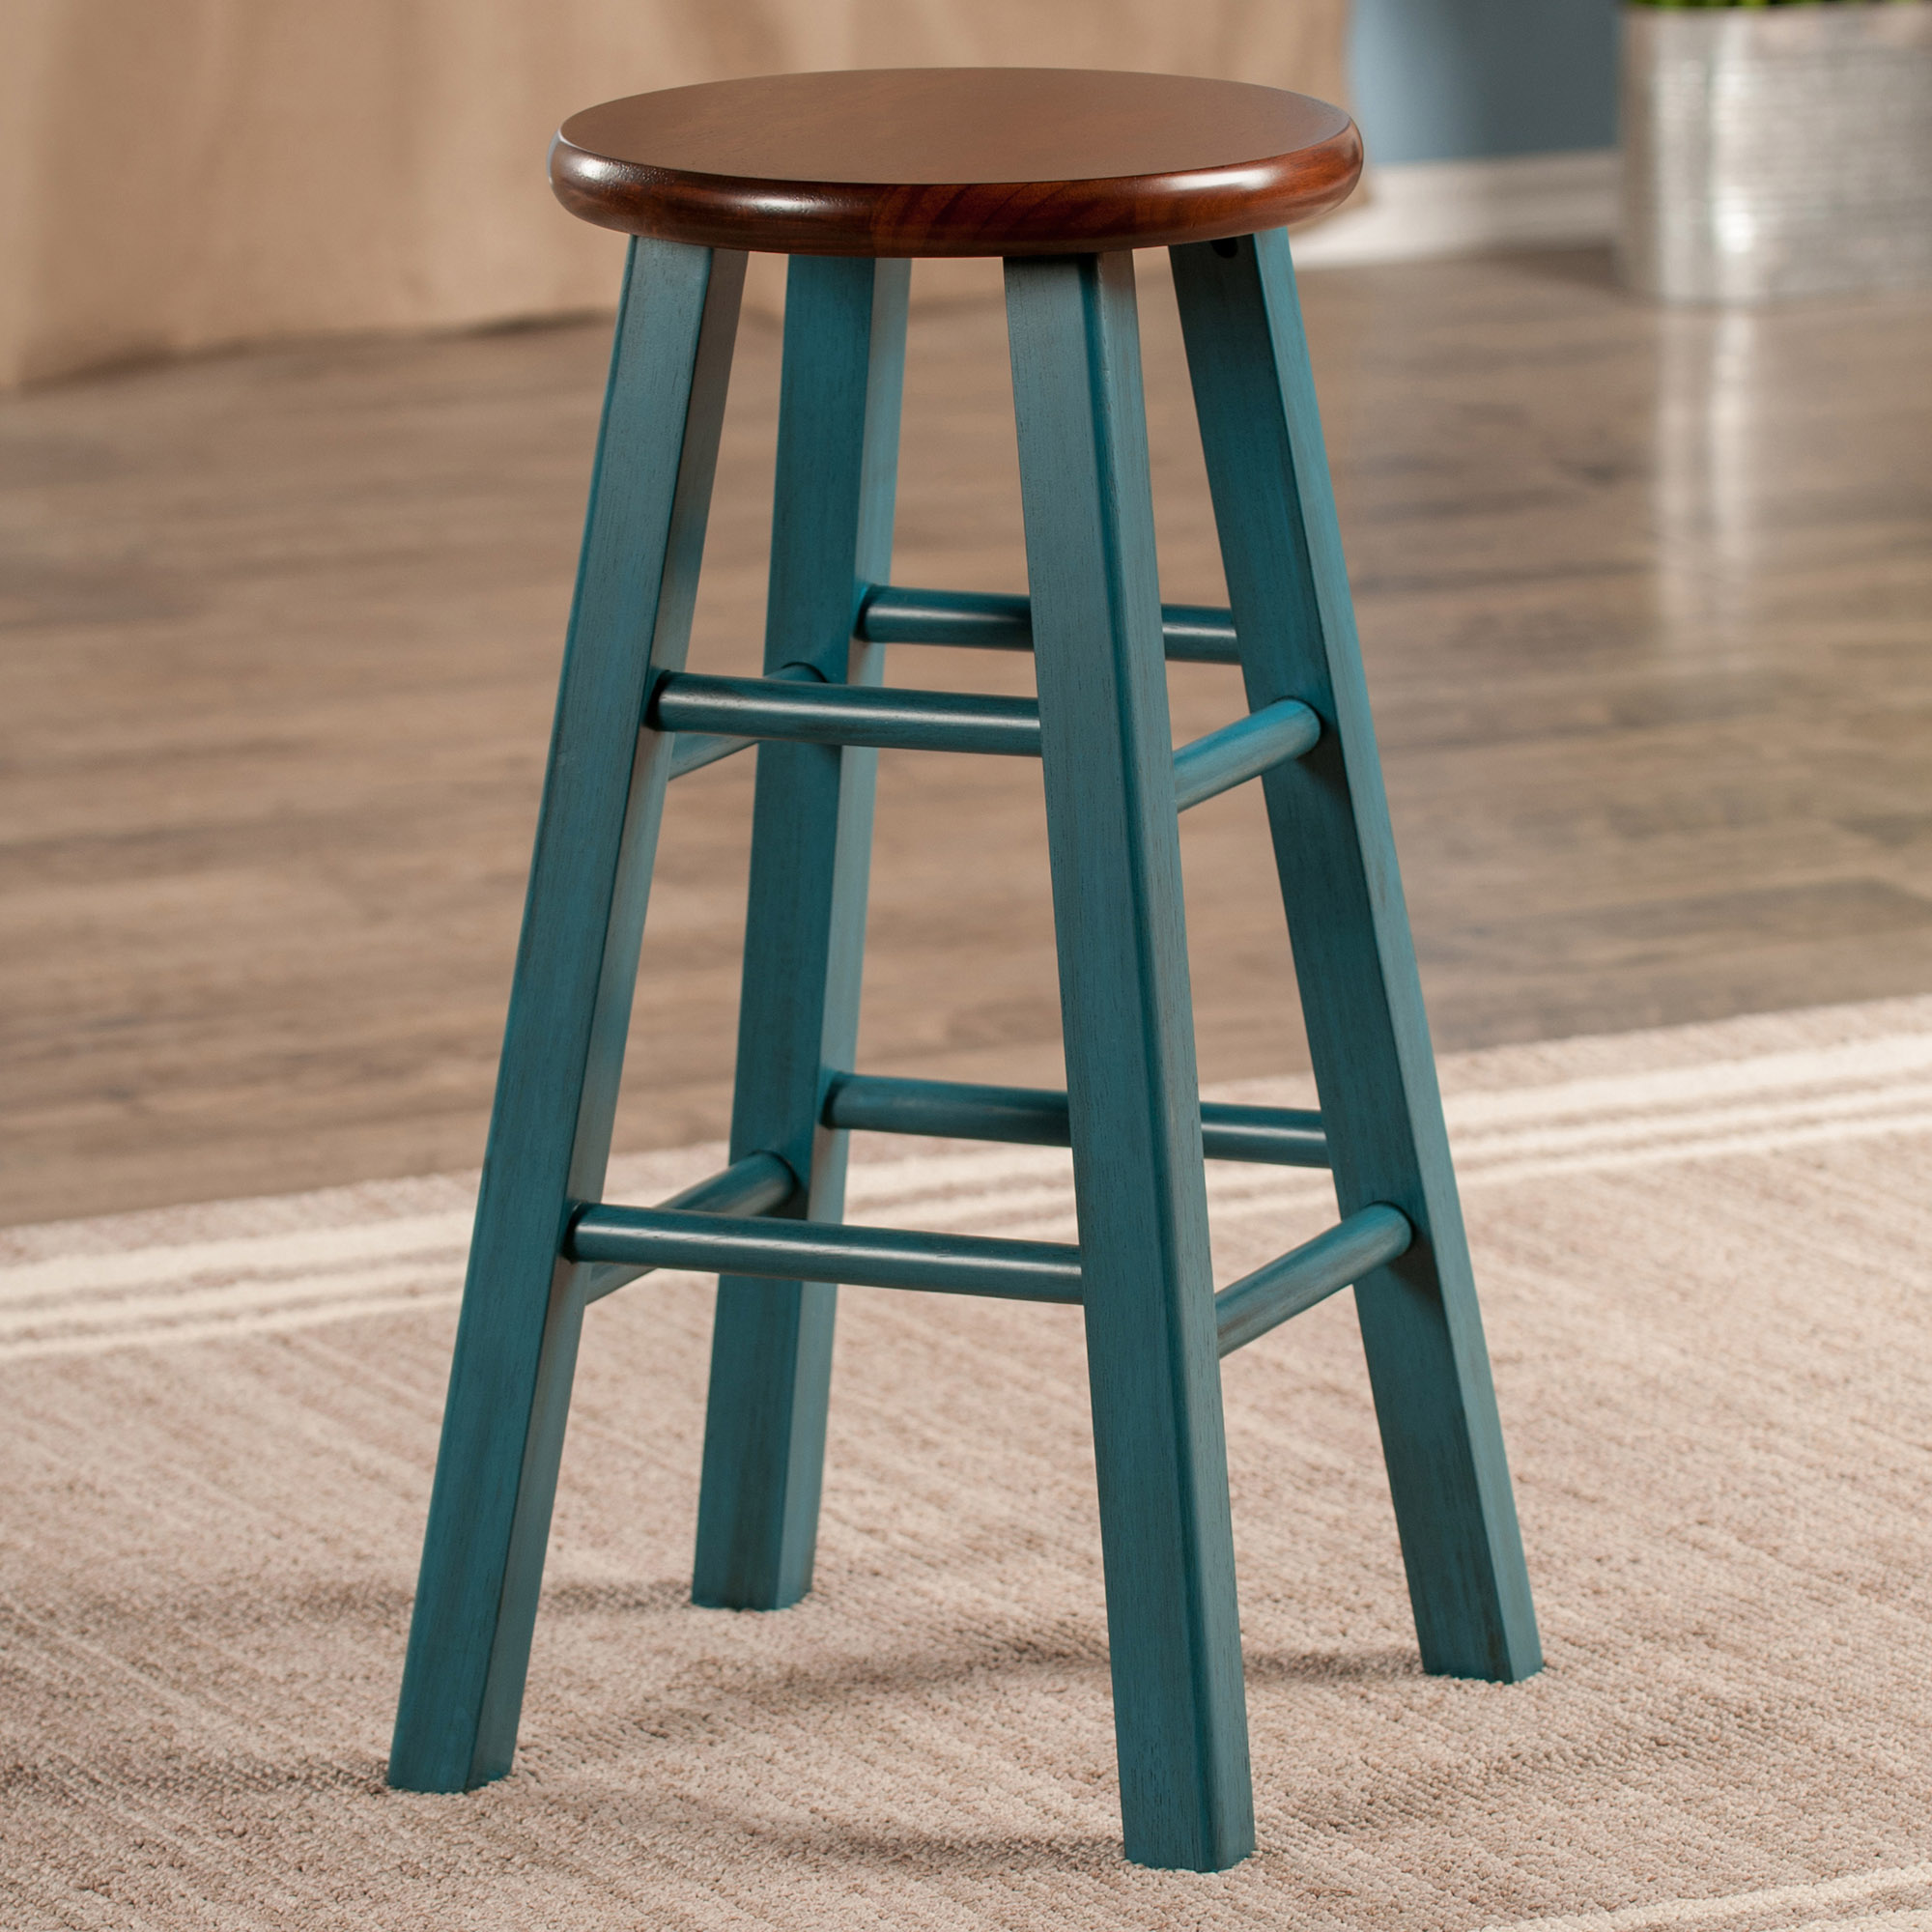 Winsome Wood Ivy 24" Counter Stool, Rustic Teal & Walnut Finish - image 4 of 6